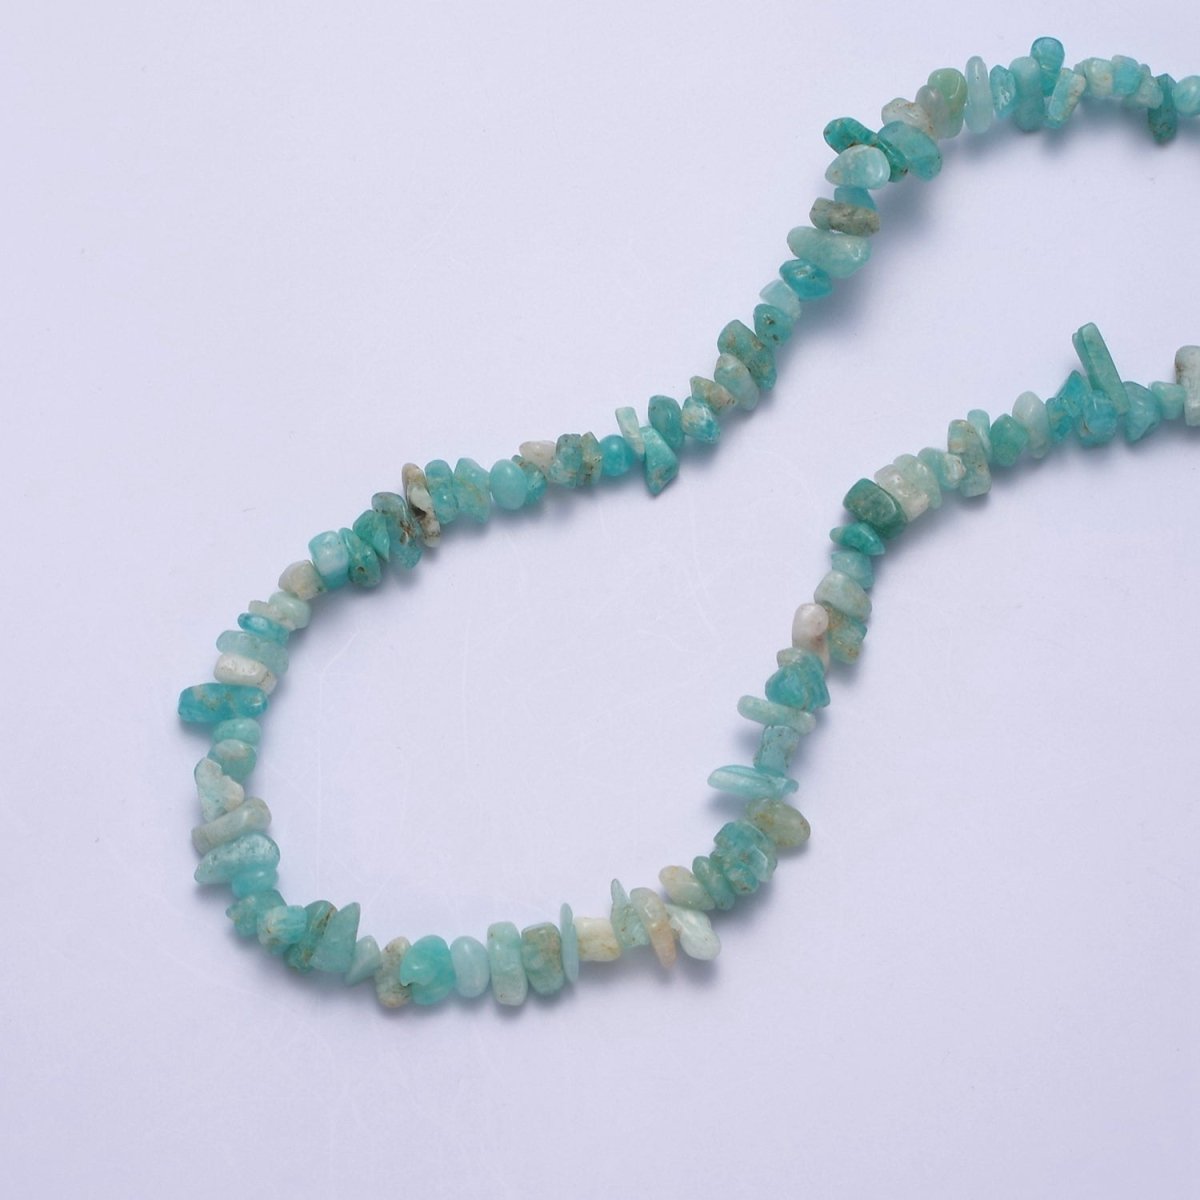 Amazonite Beaded Necklace - Chip Necklace Healing Crystals, Gemstone Necklace, Handmade Jewelry, Crystal Necklace | WA-648 Clearance Pricing - DLUXCA